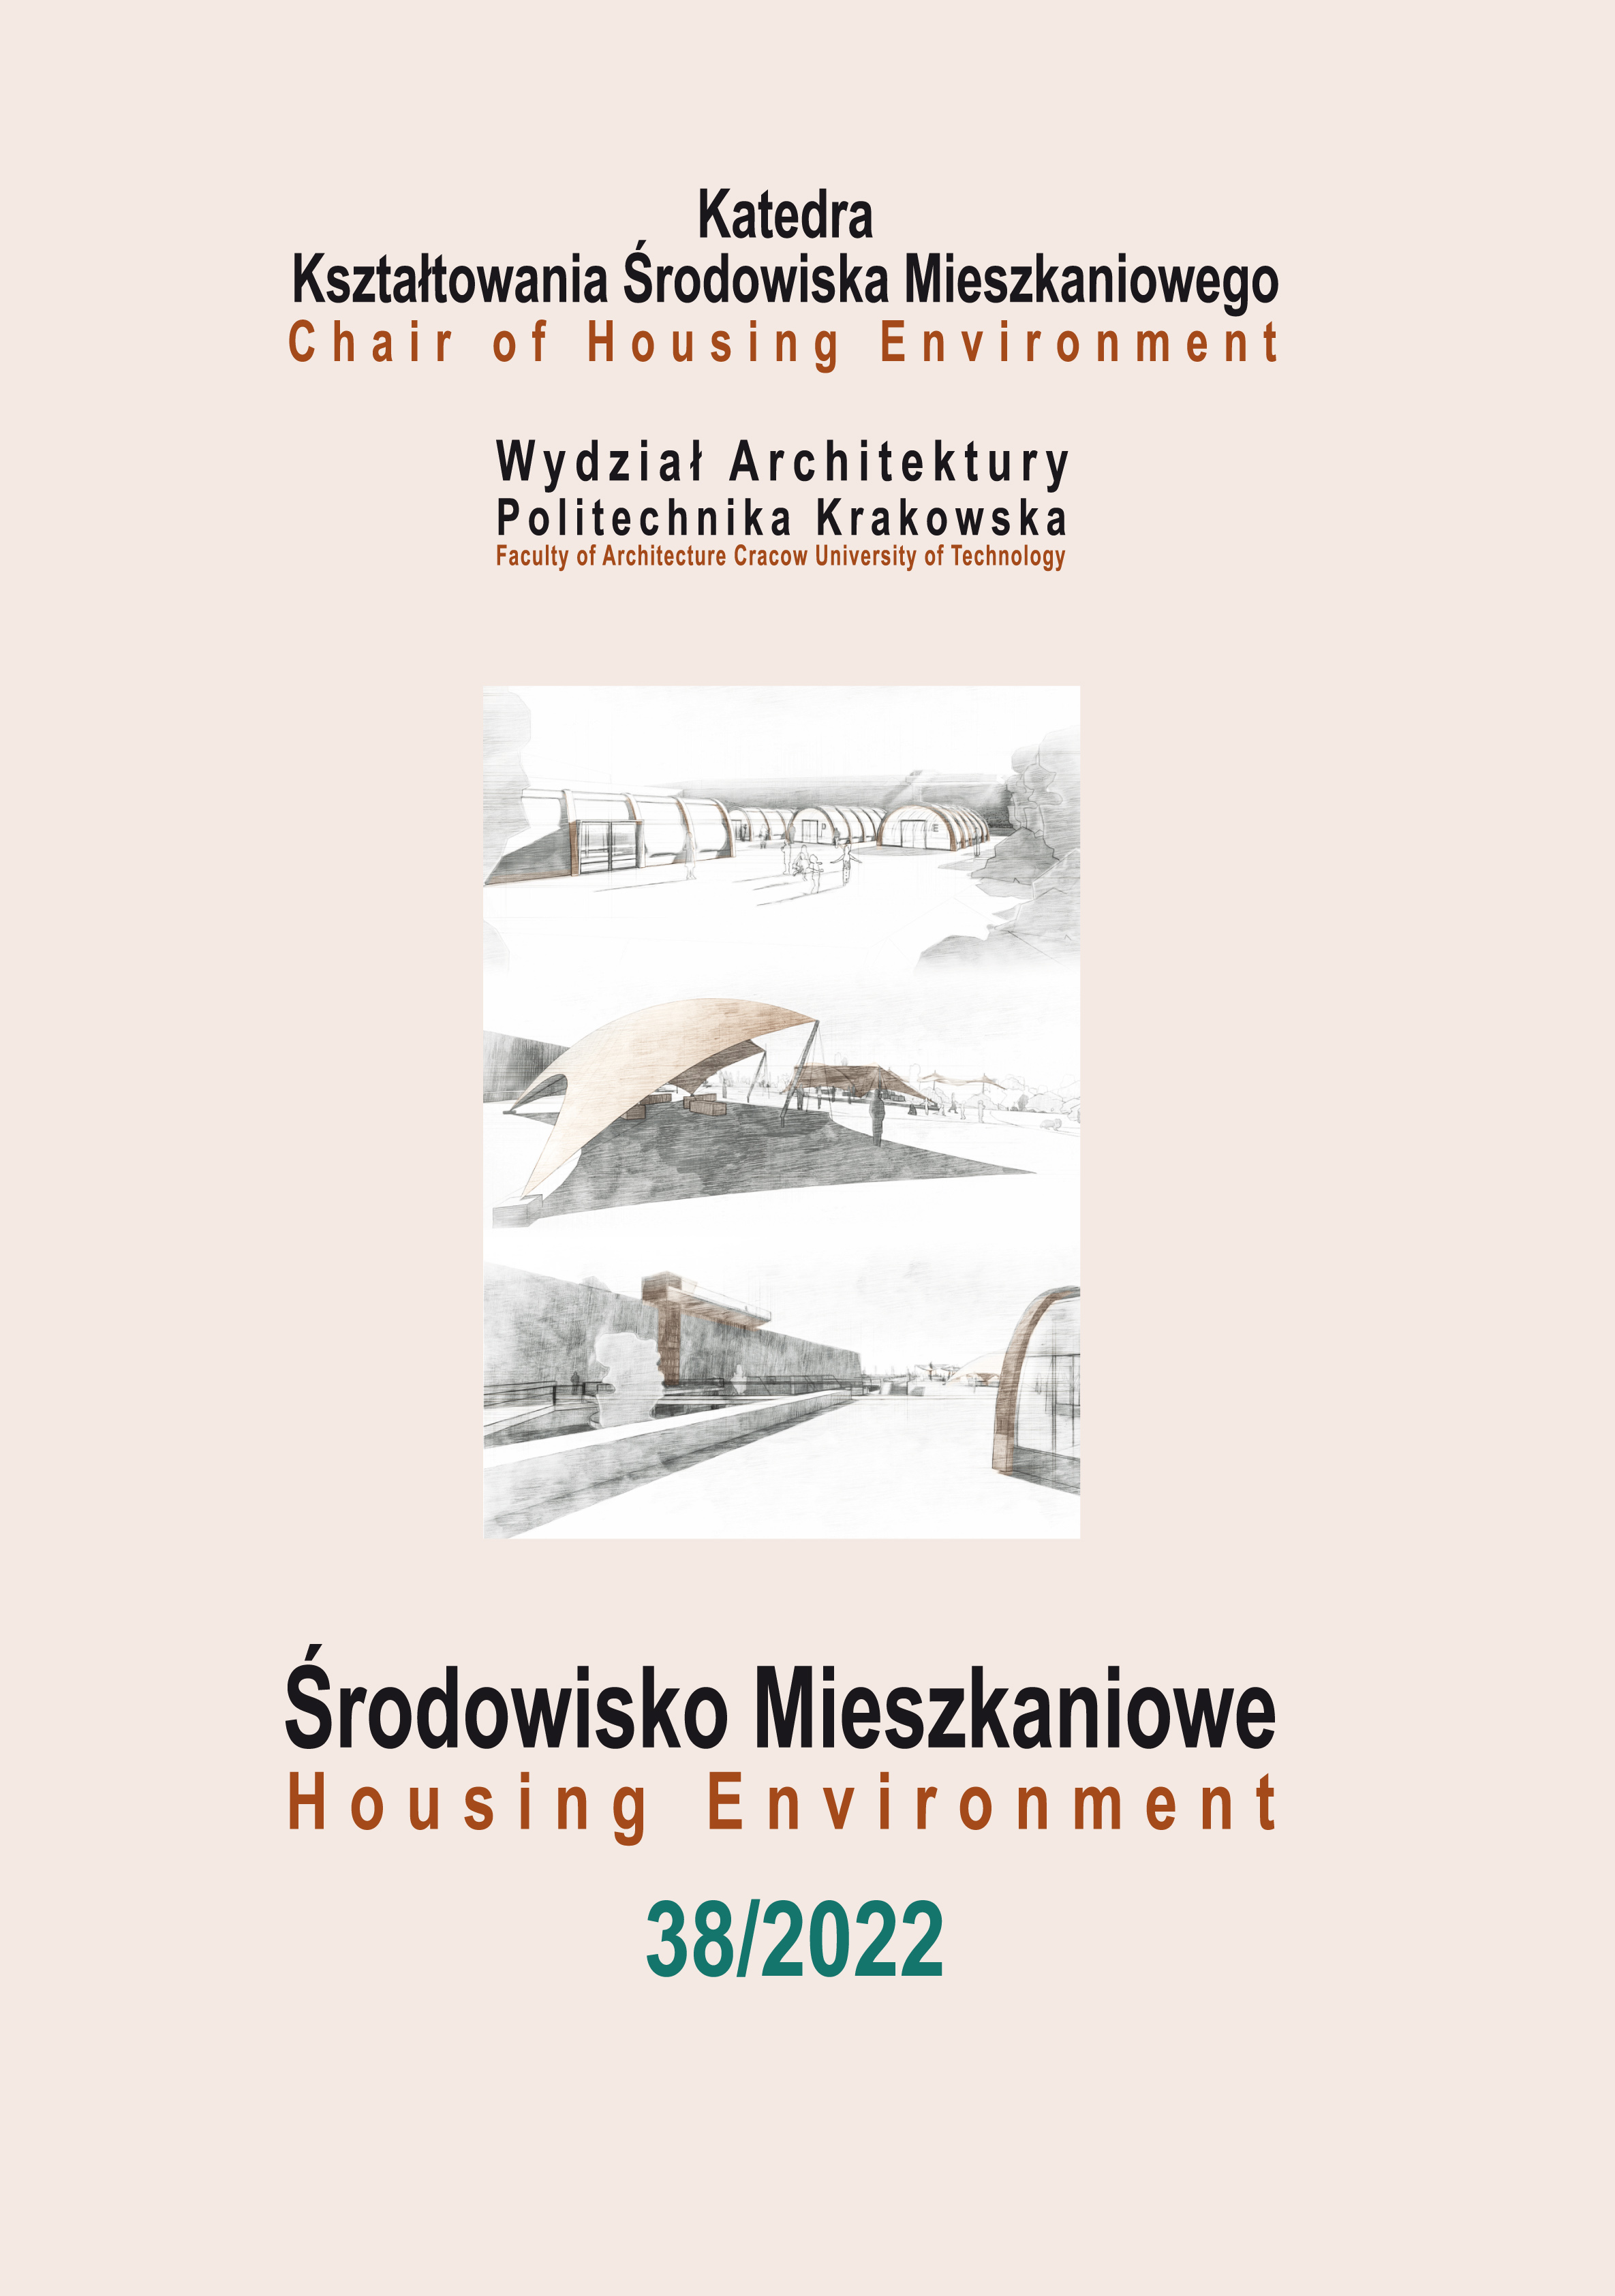 Residential development in post-industrial
and service areas and the availability
of green public spaces – the case of the
„Ludwinów-Mateczny” area in Krakow